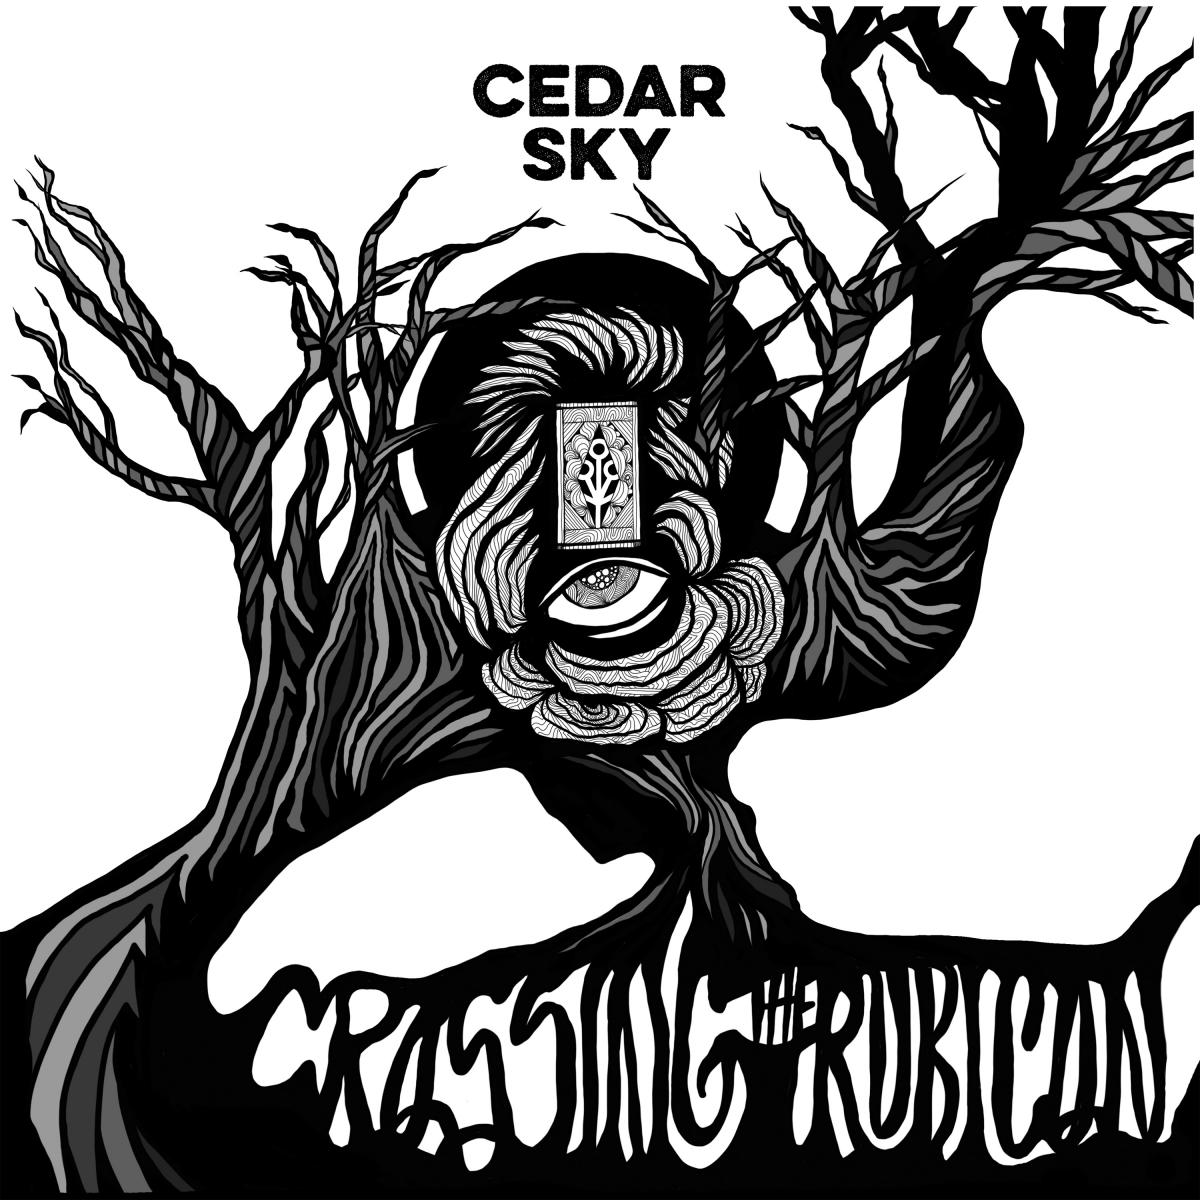 New single “Diana" from Cedar Sky Released from the Album Crossing The Rubicon